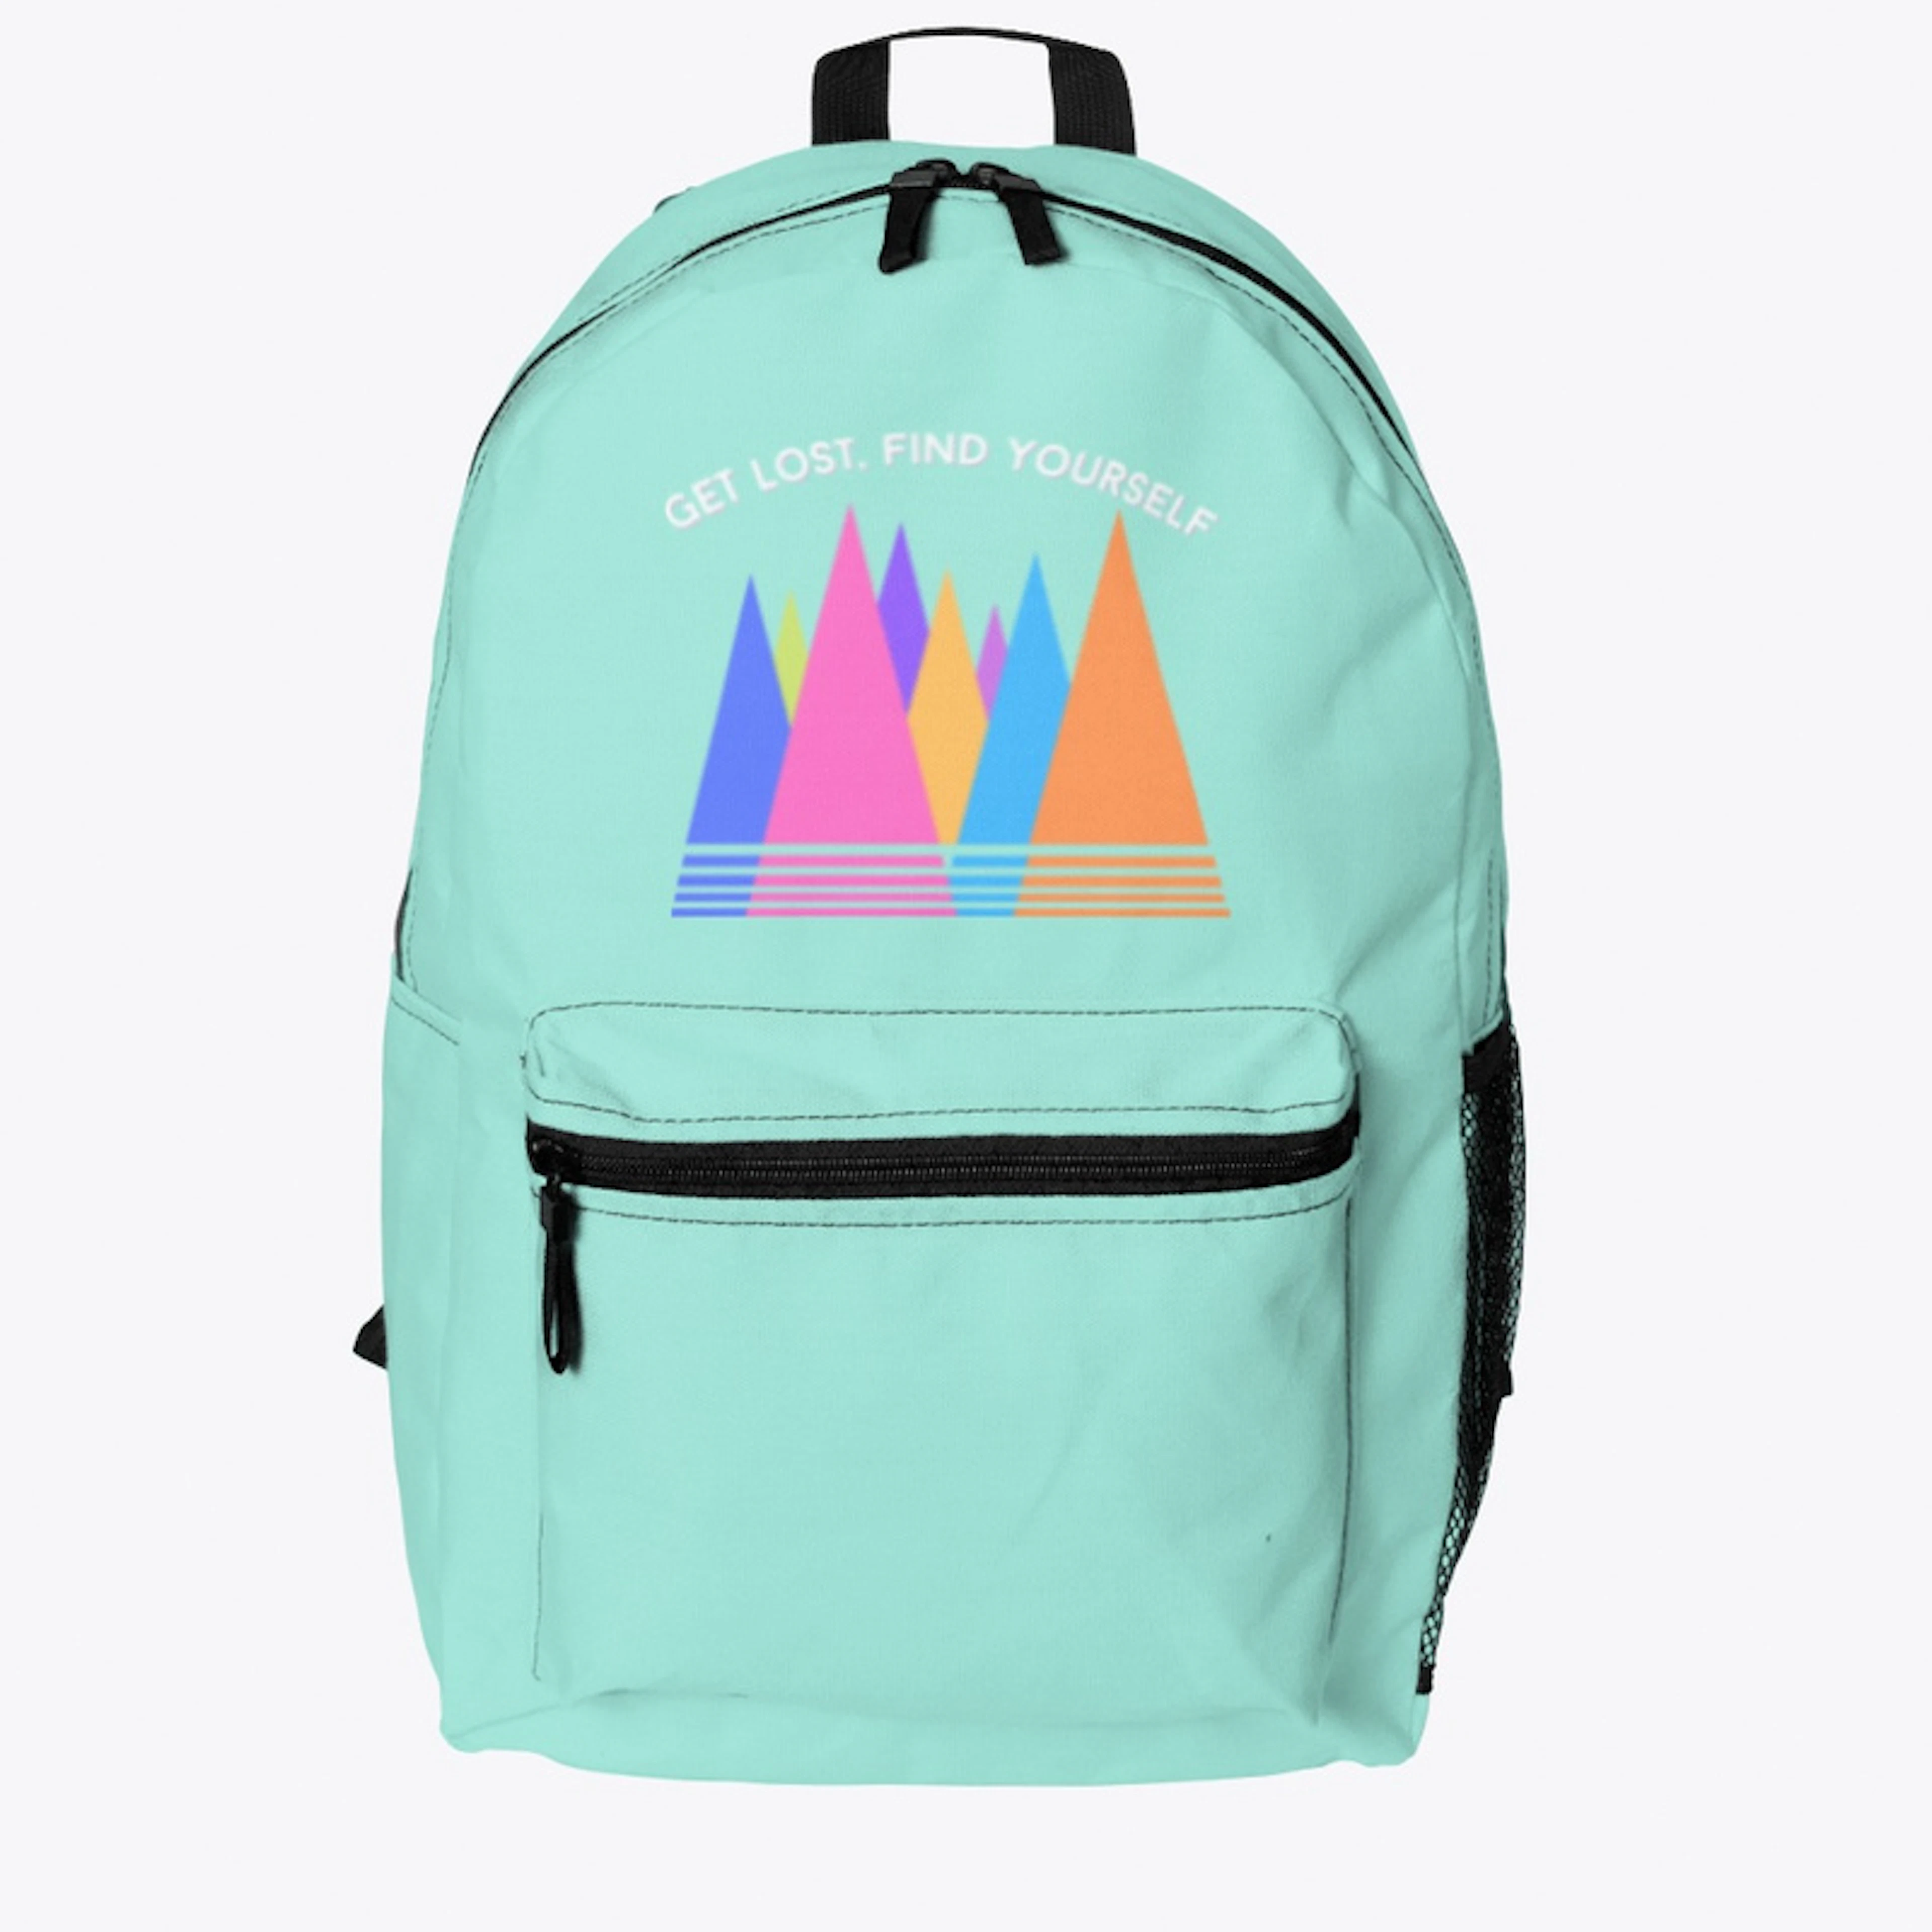 Get Lost, Find Yourself Backpack